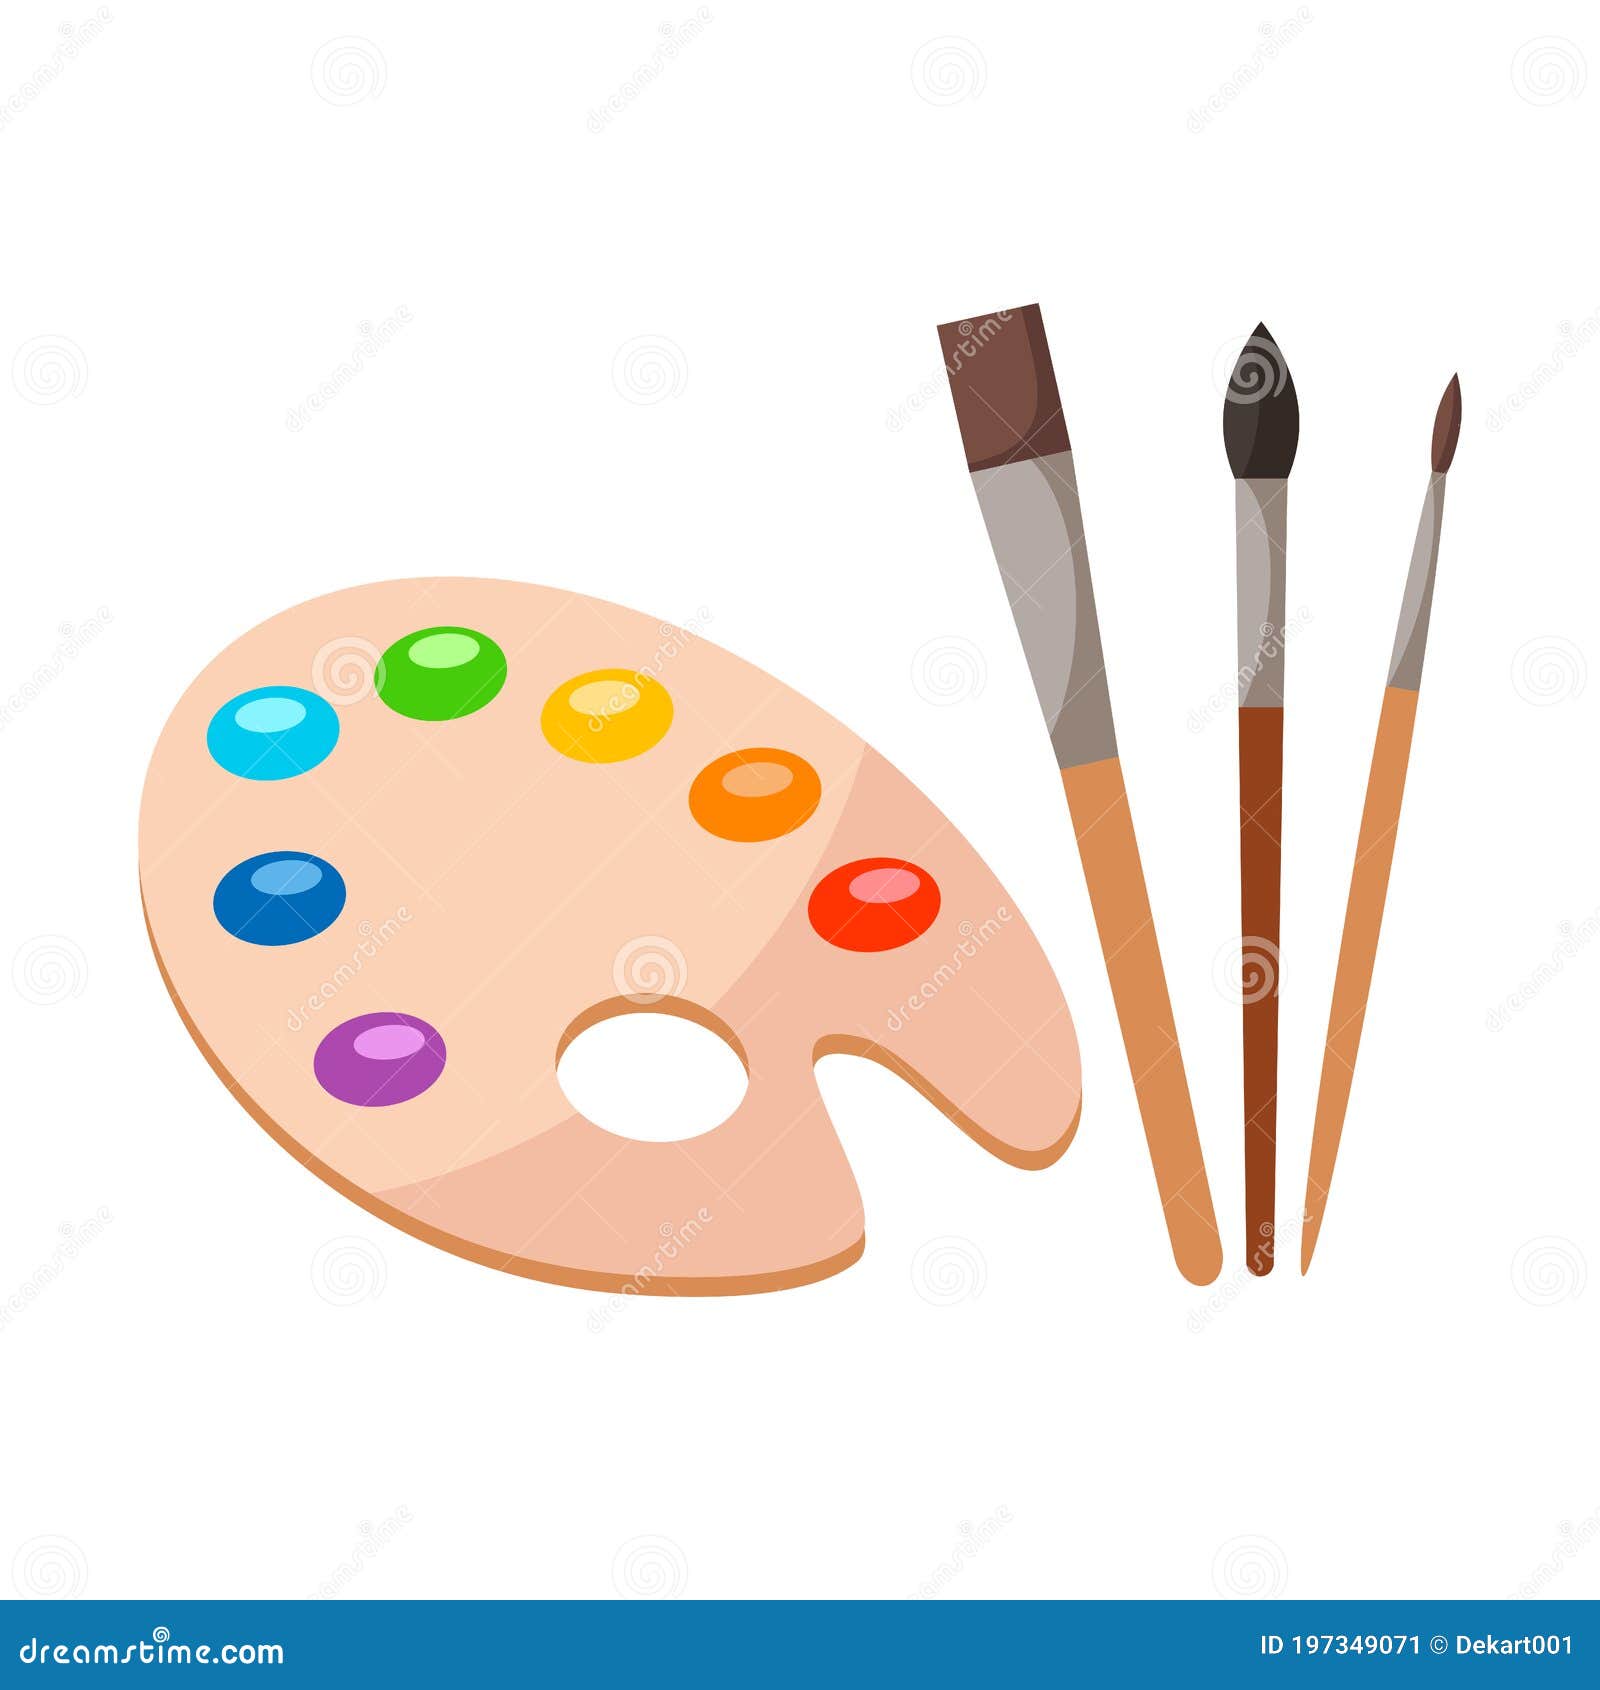 Oil Painting Supplies Cliparts, Stock Vector and Royalty Free Oil Painting  Supplies Illustrations